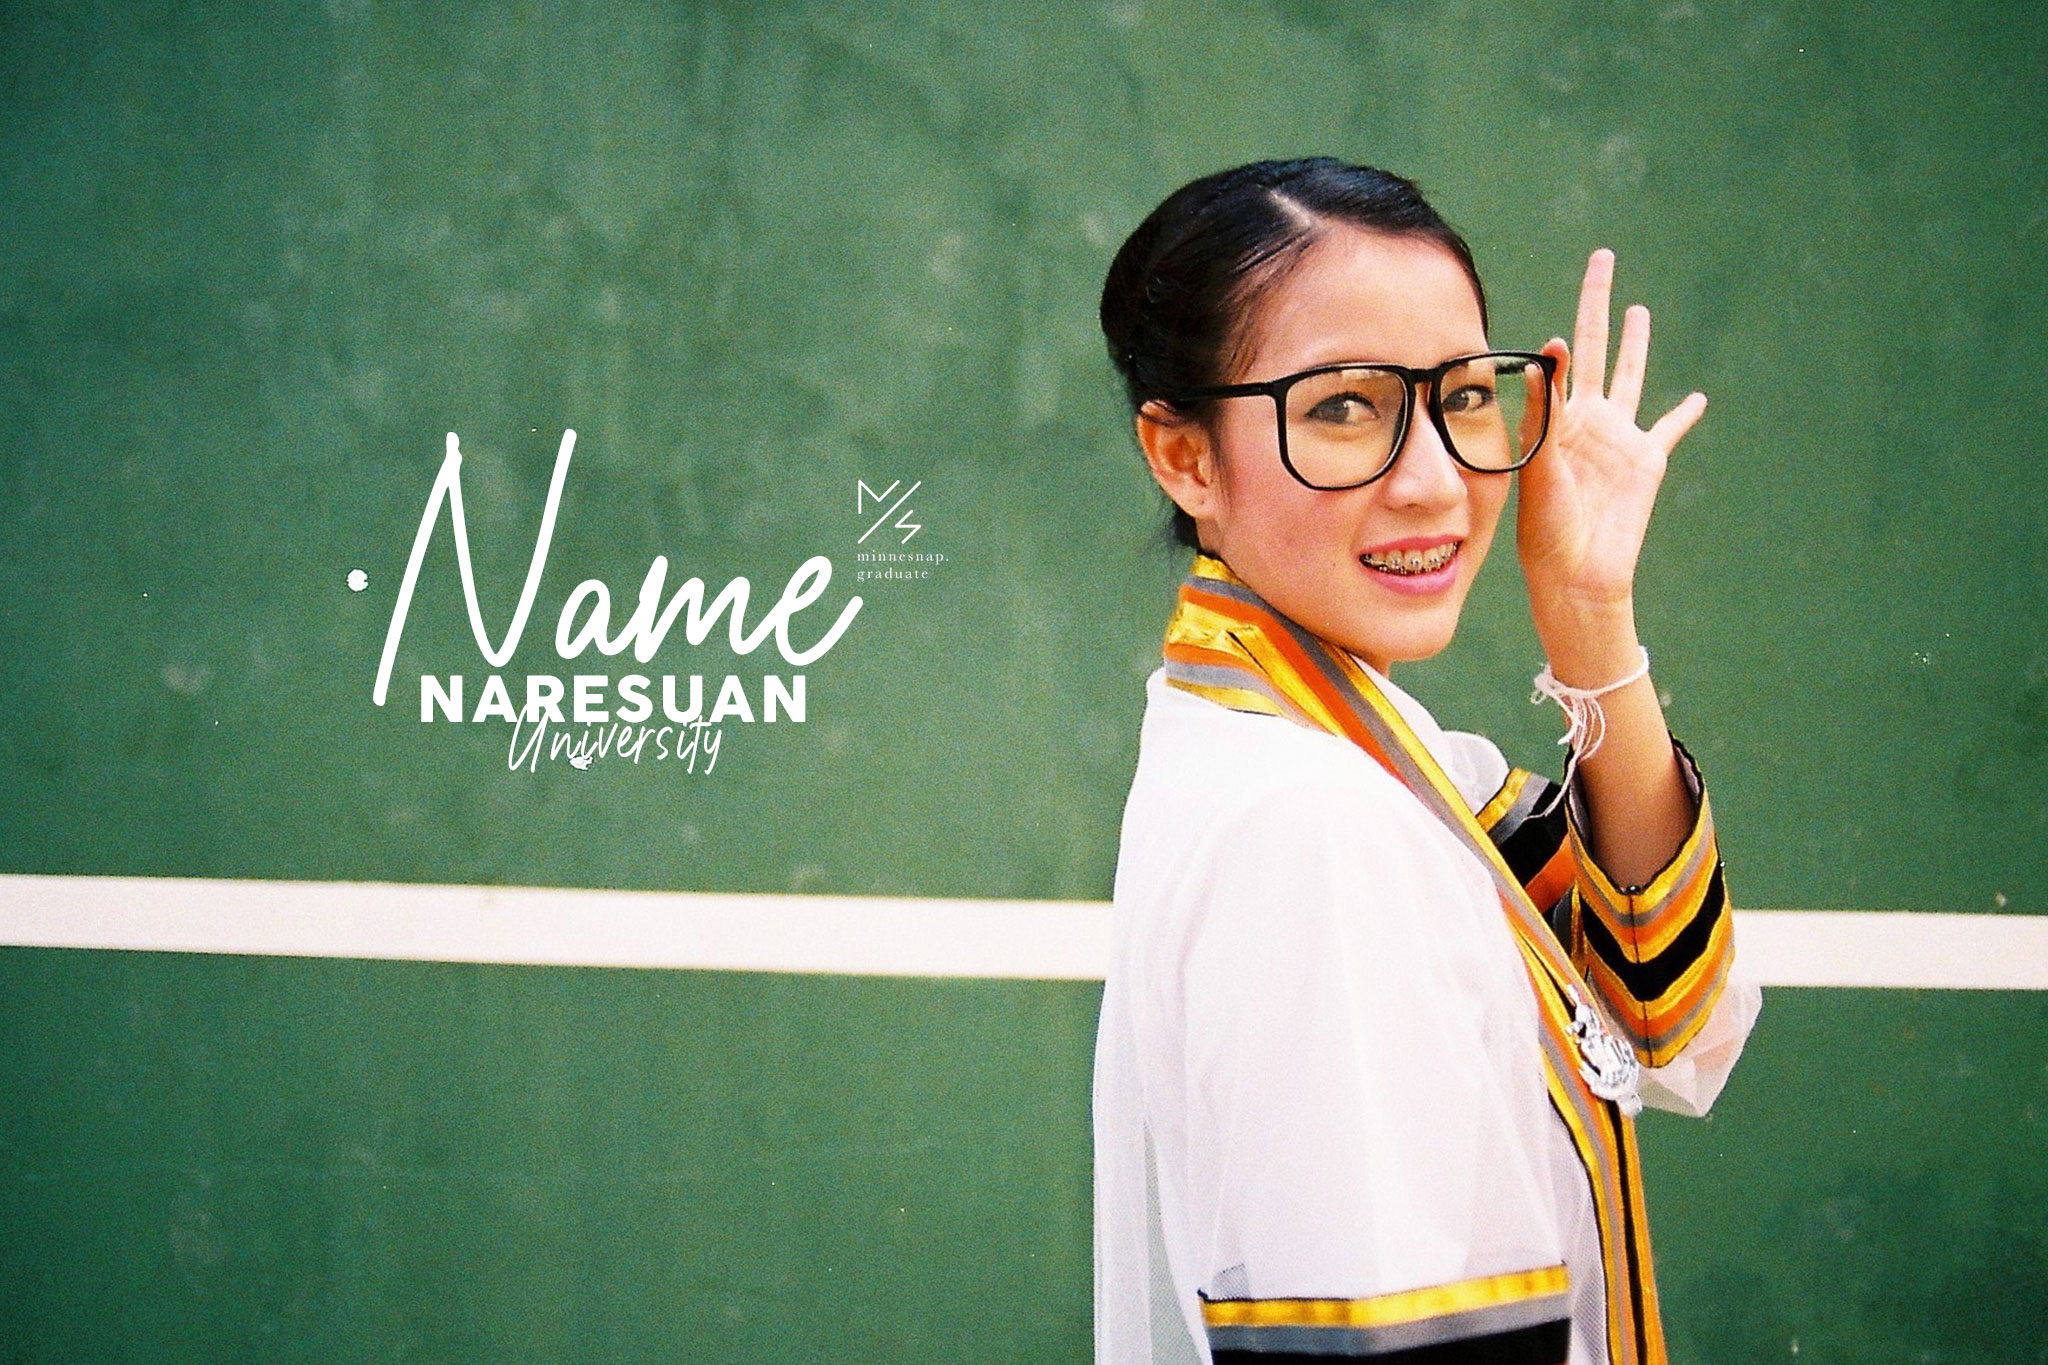 naresuan university thailand graduated commencement name cover